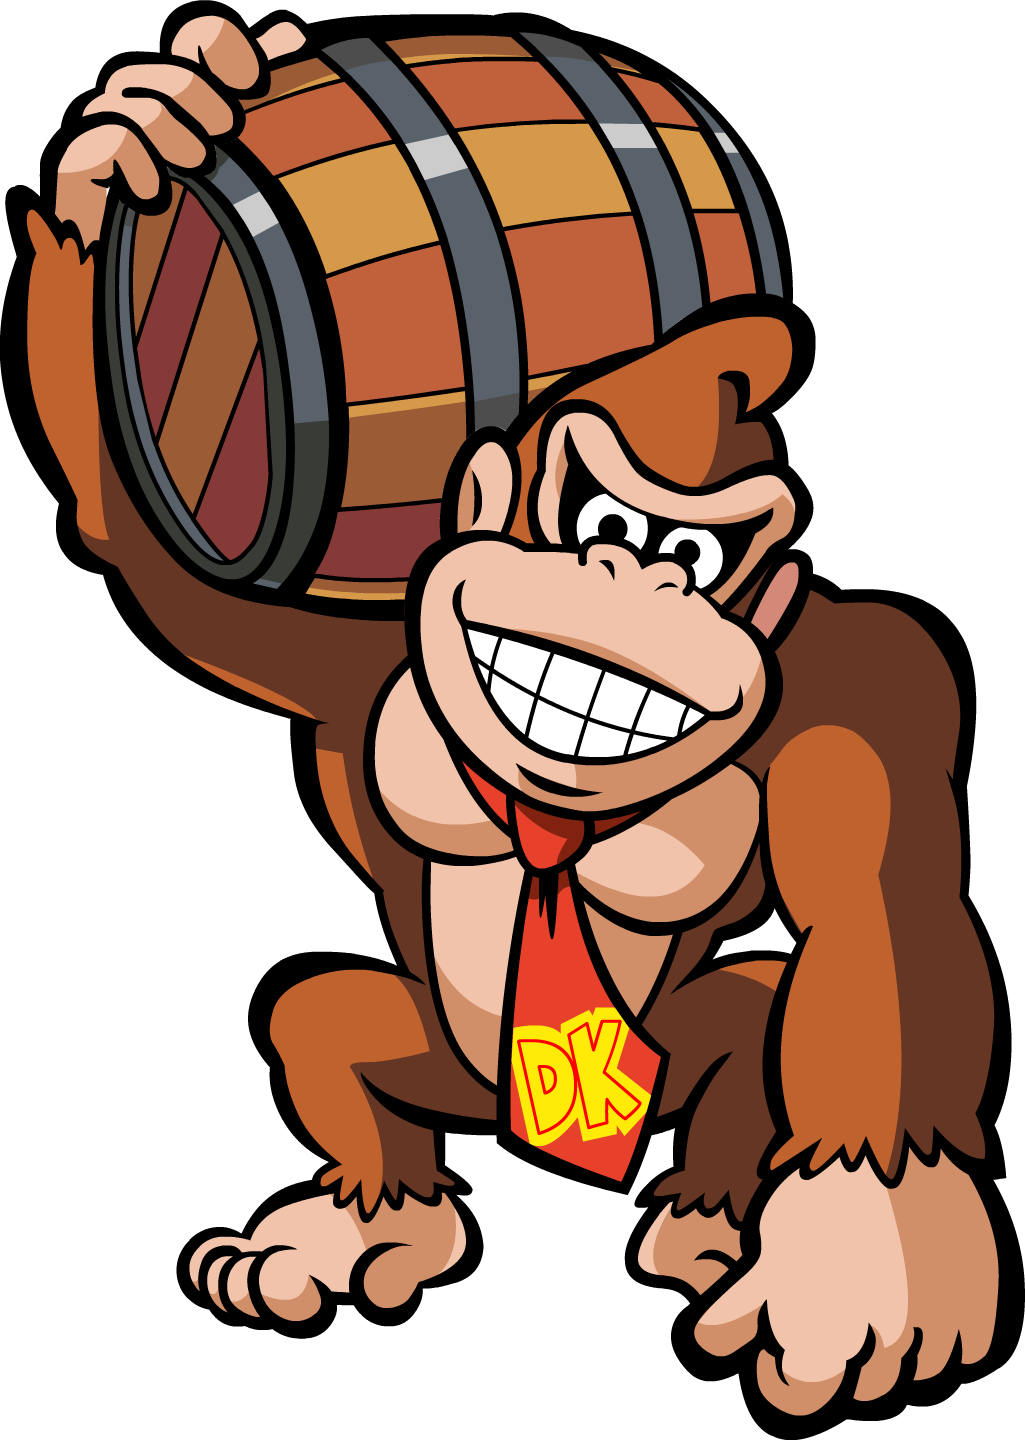 Donkey Kong Character Background PNG Image